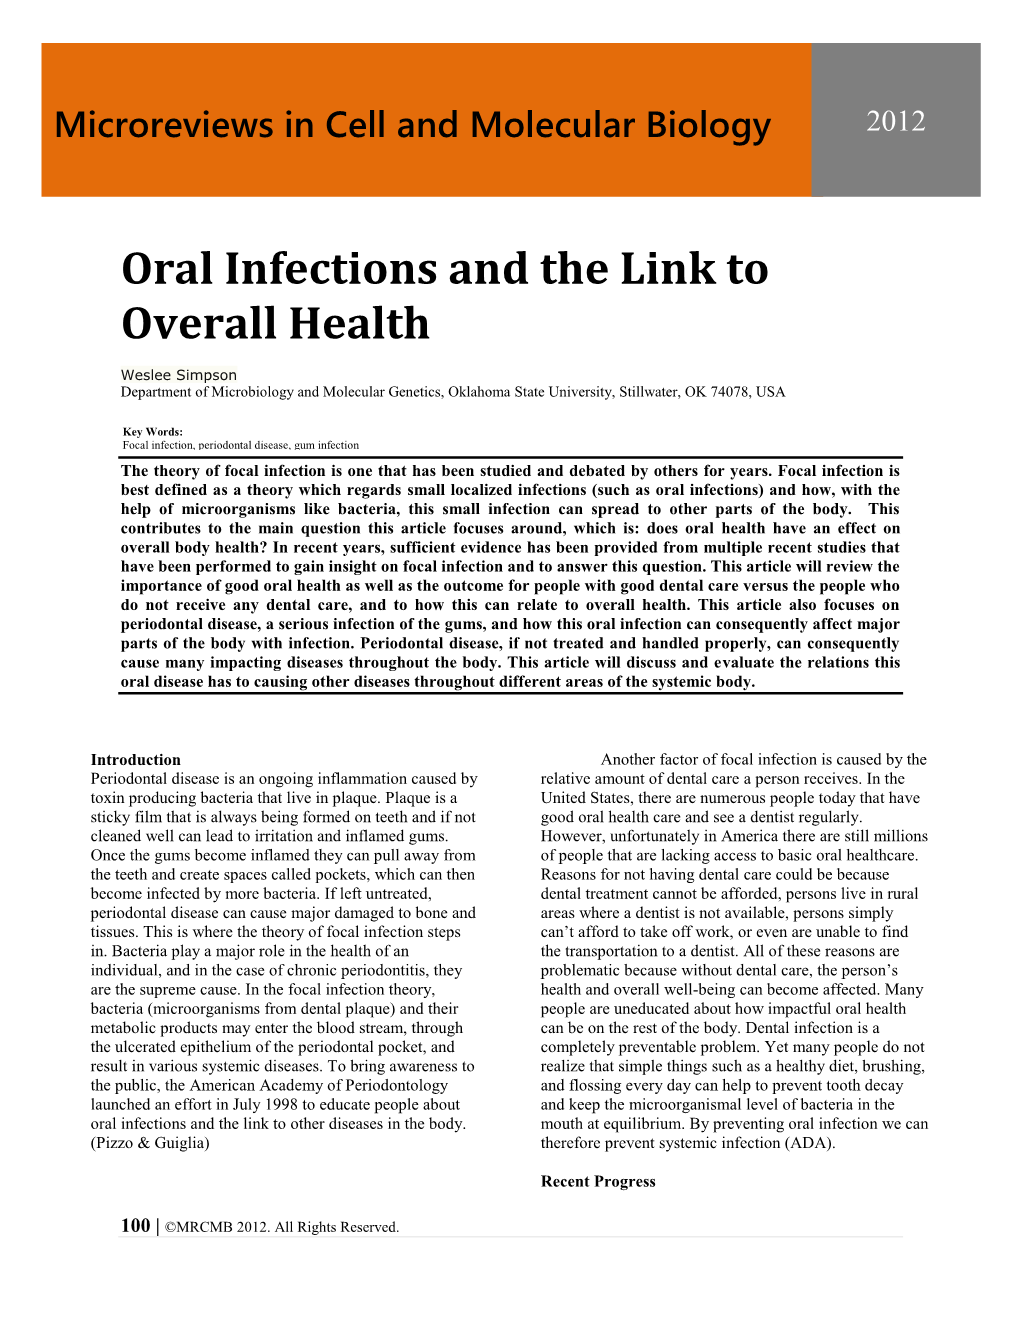 Oral Infections and the Link to Overall Health